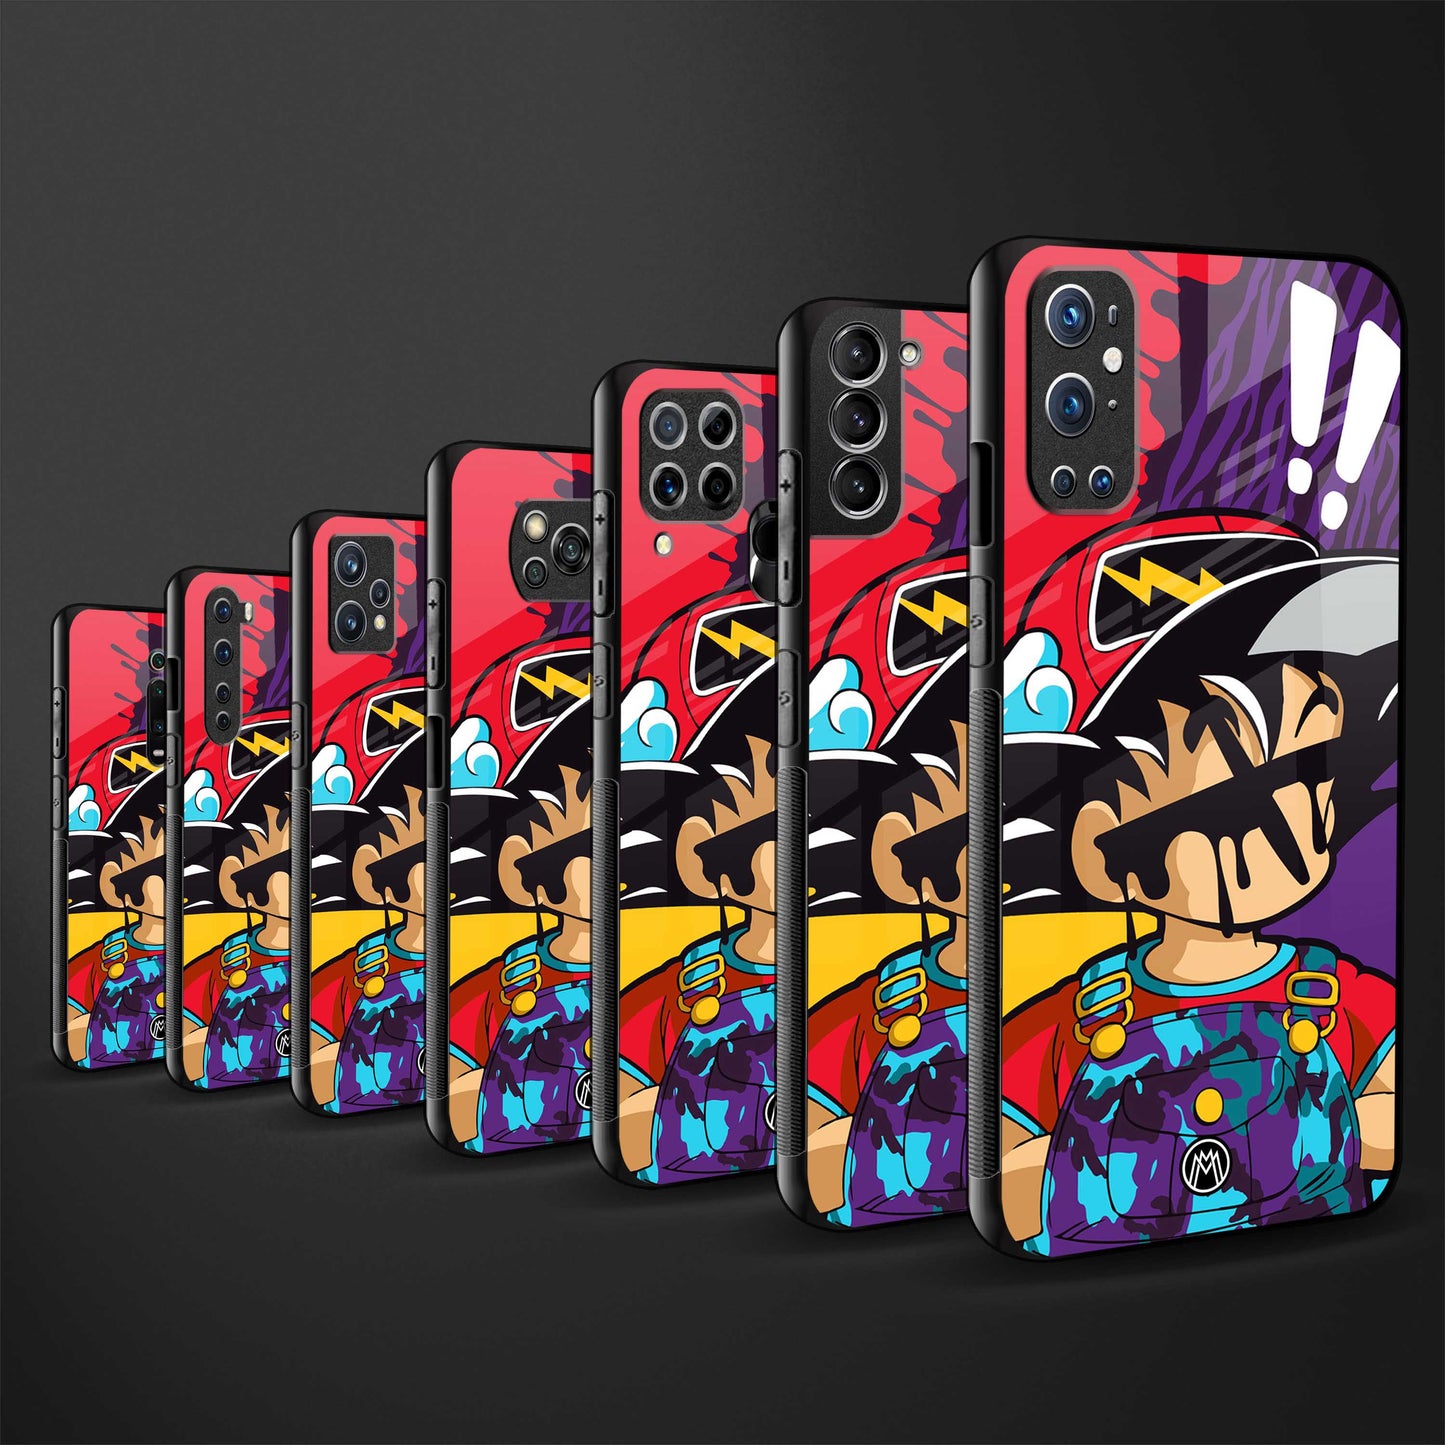 dragon ball z art phone cover for iphone 7 plus